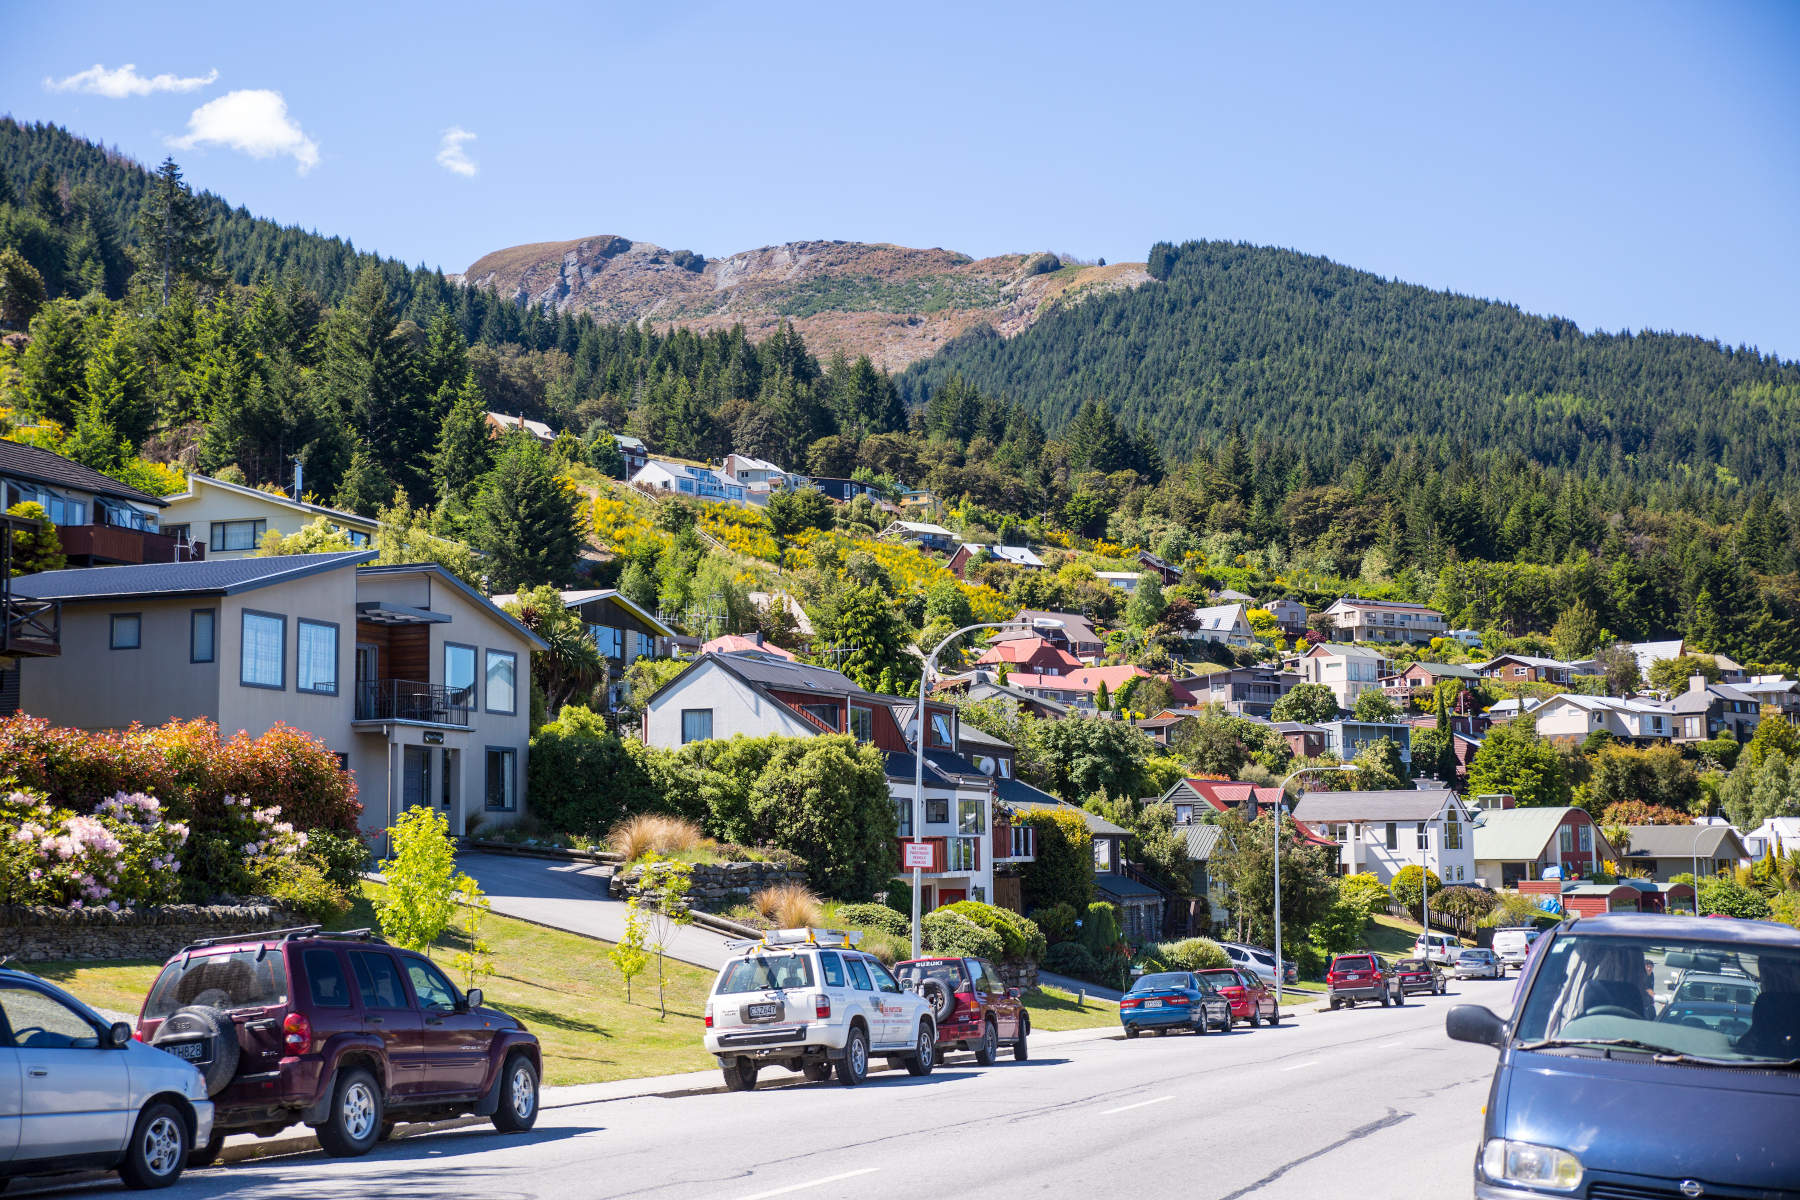 What To Know About Buying or Renting Property in New Zealand as an Expat Featured Image